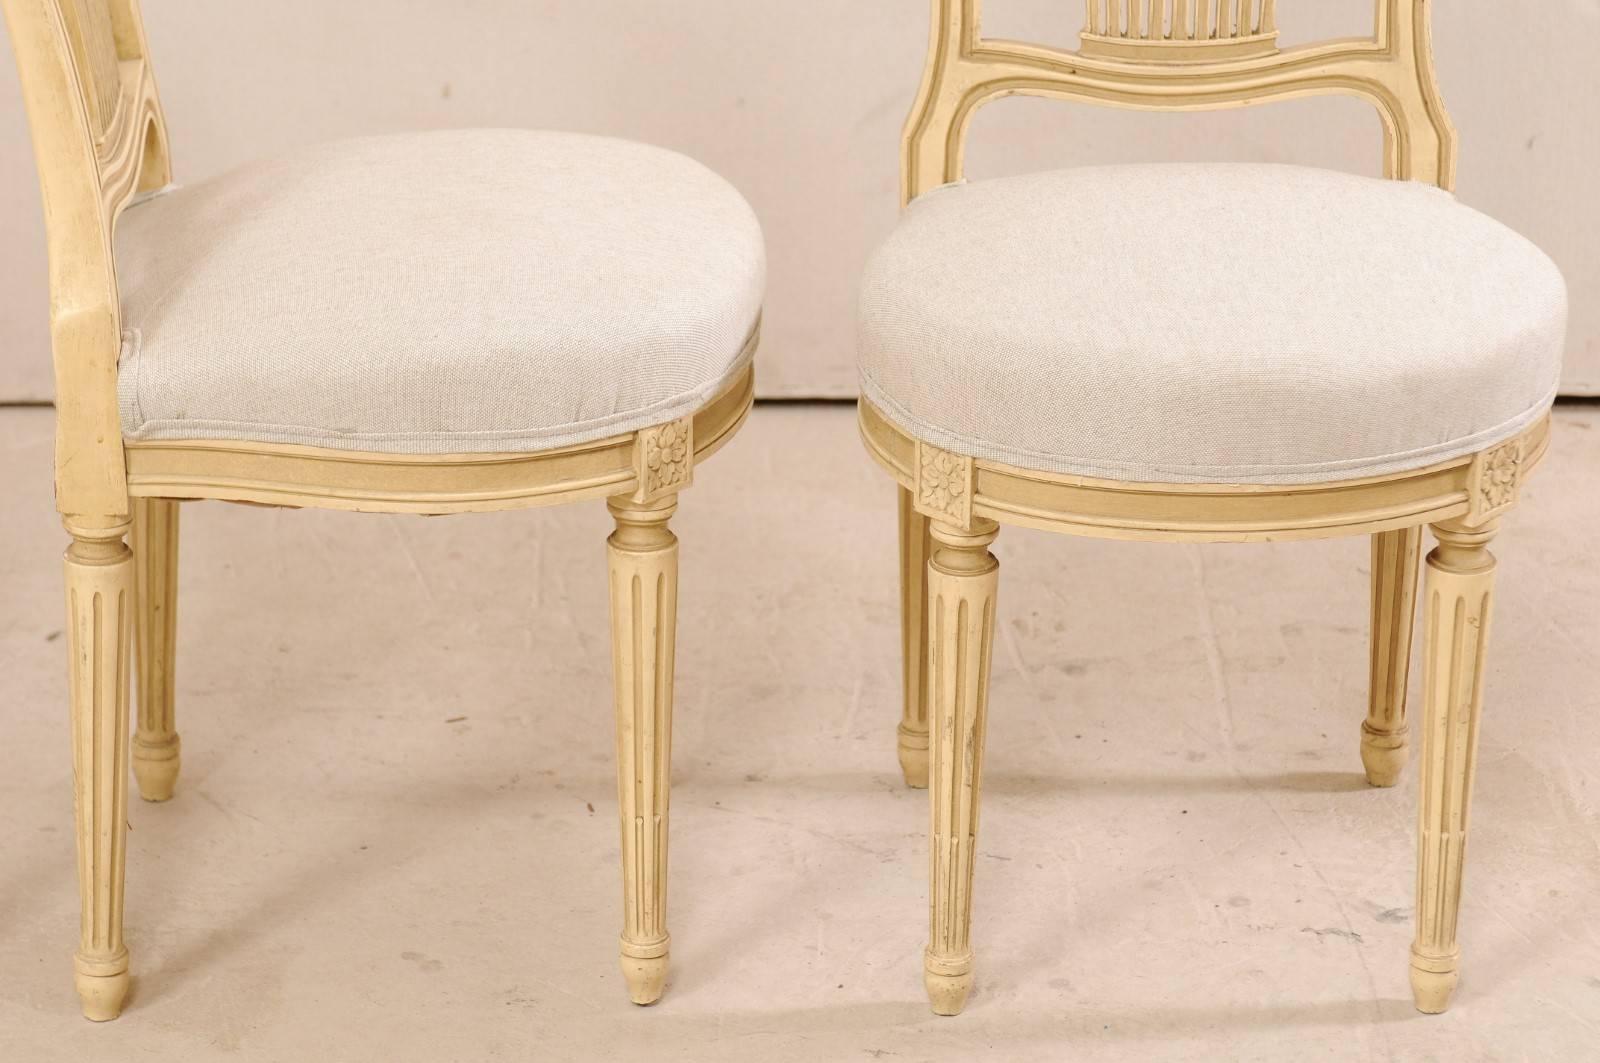 Set of Four French Louis XVI Style Painted Wood Balloon-Back Chairs (Geschnitzt)